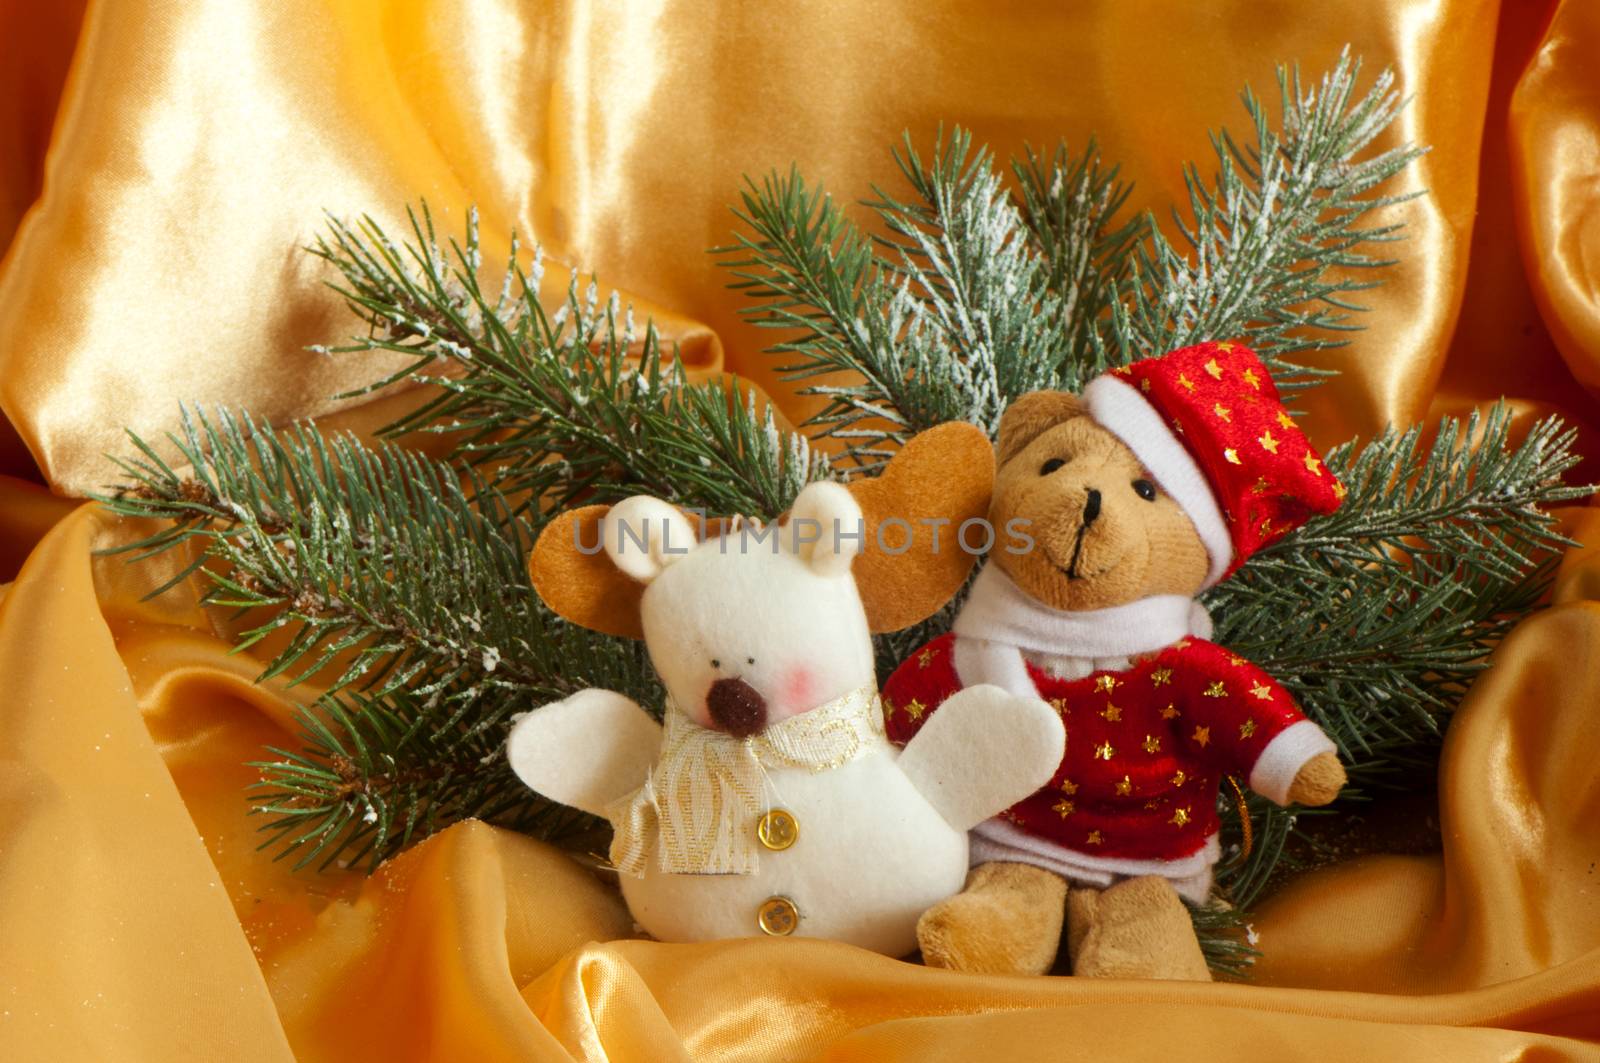 a Christmas puppets on the white background